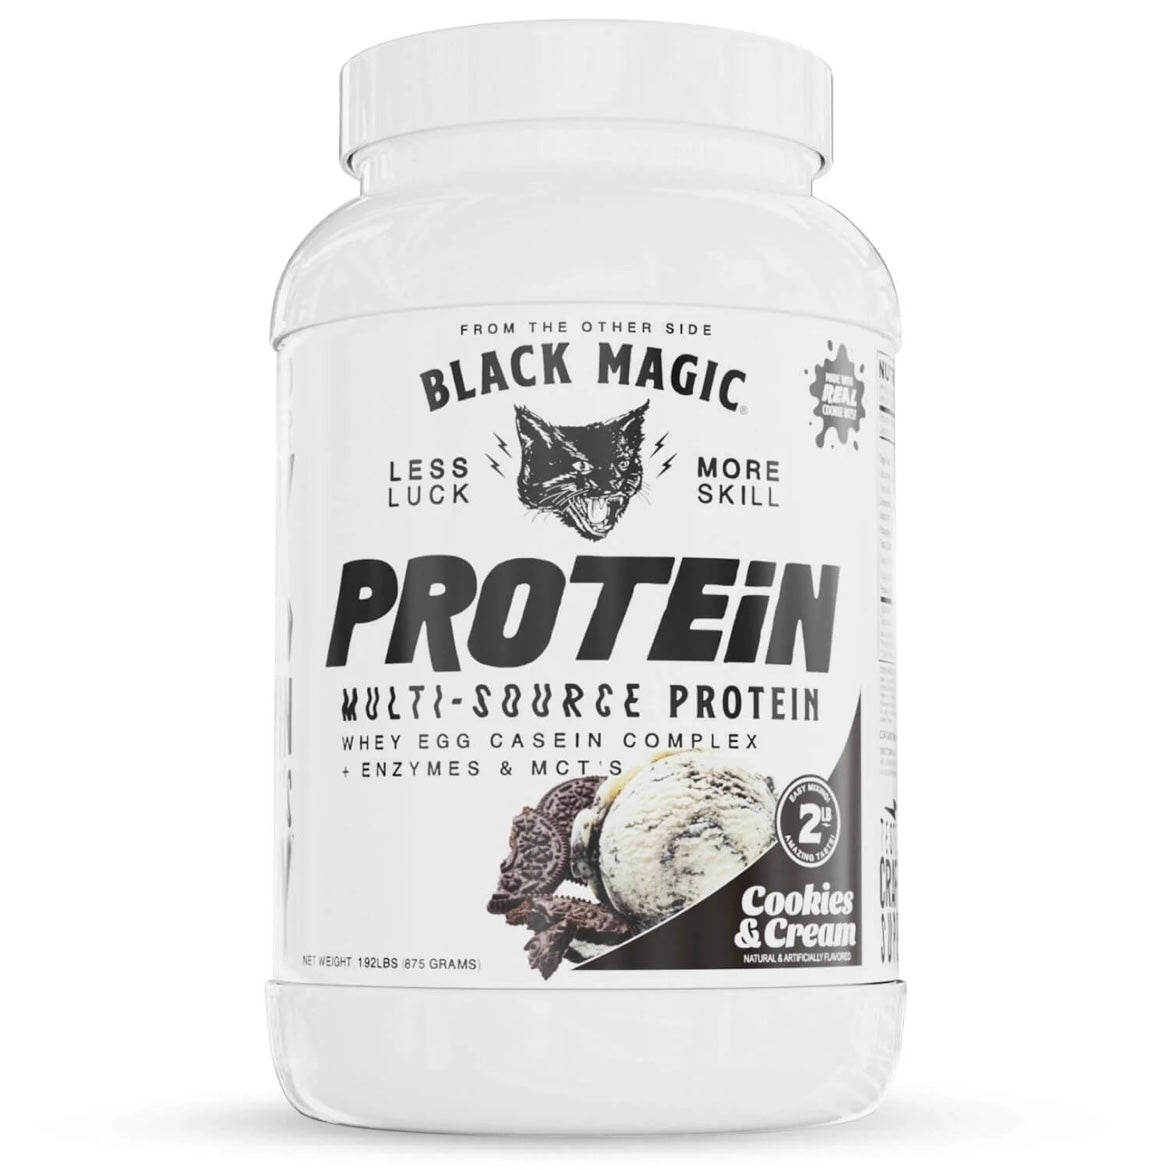 Multi-Source Protein by Black Magic